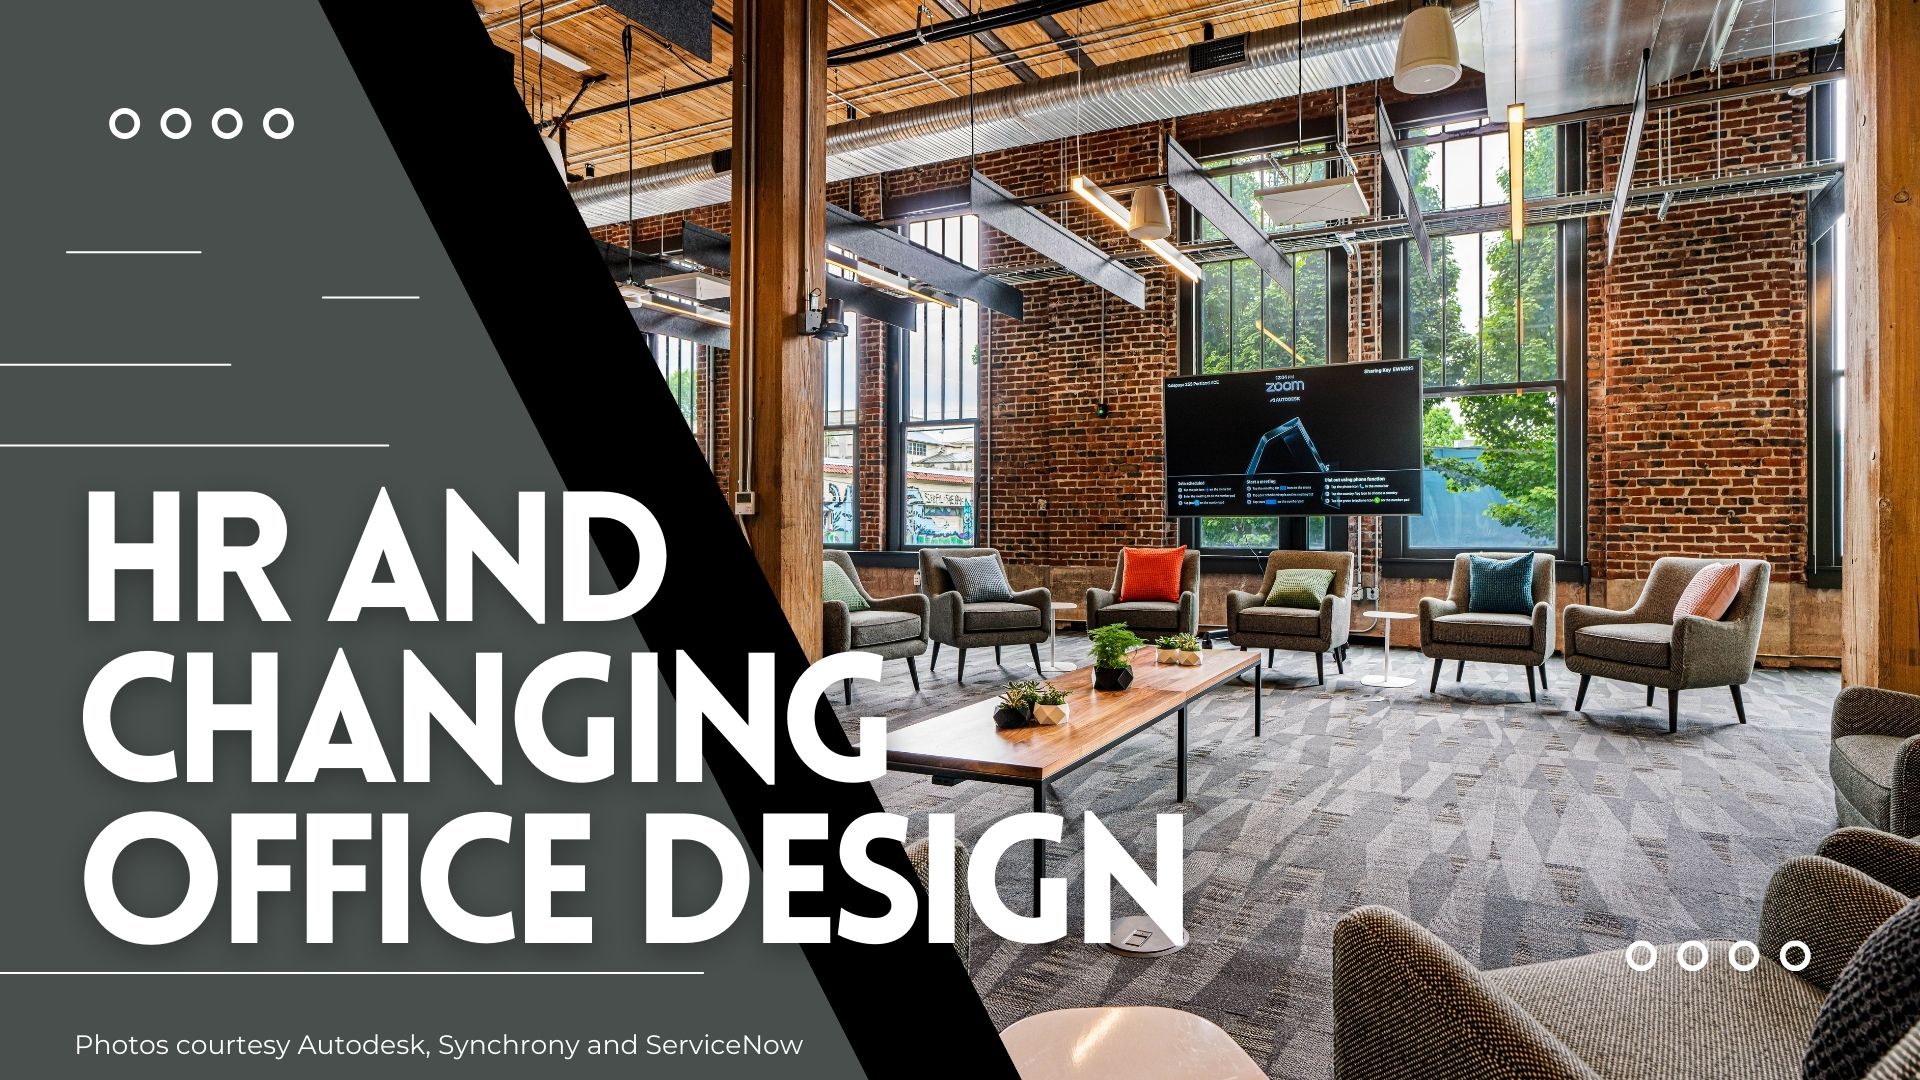 HR and changing office design